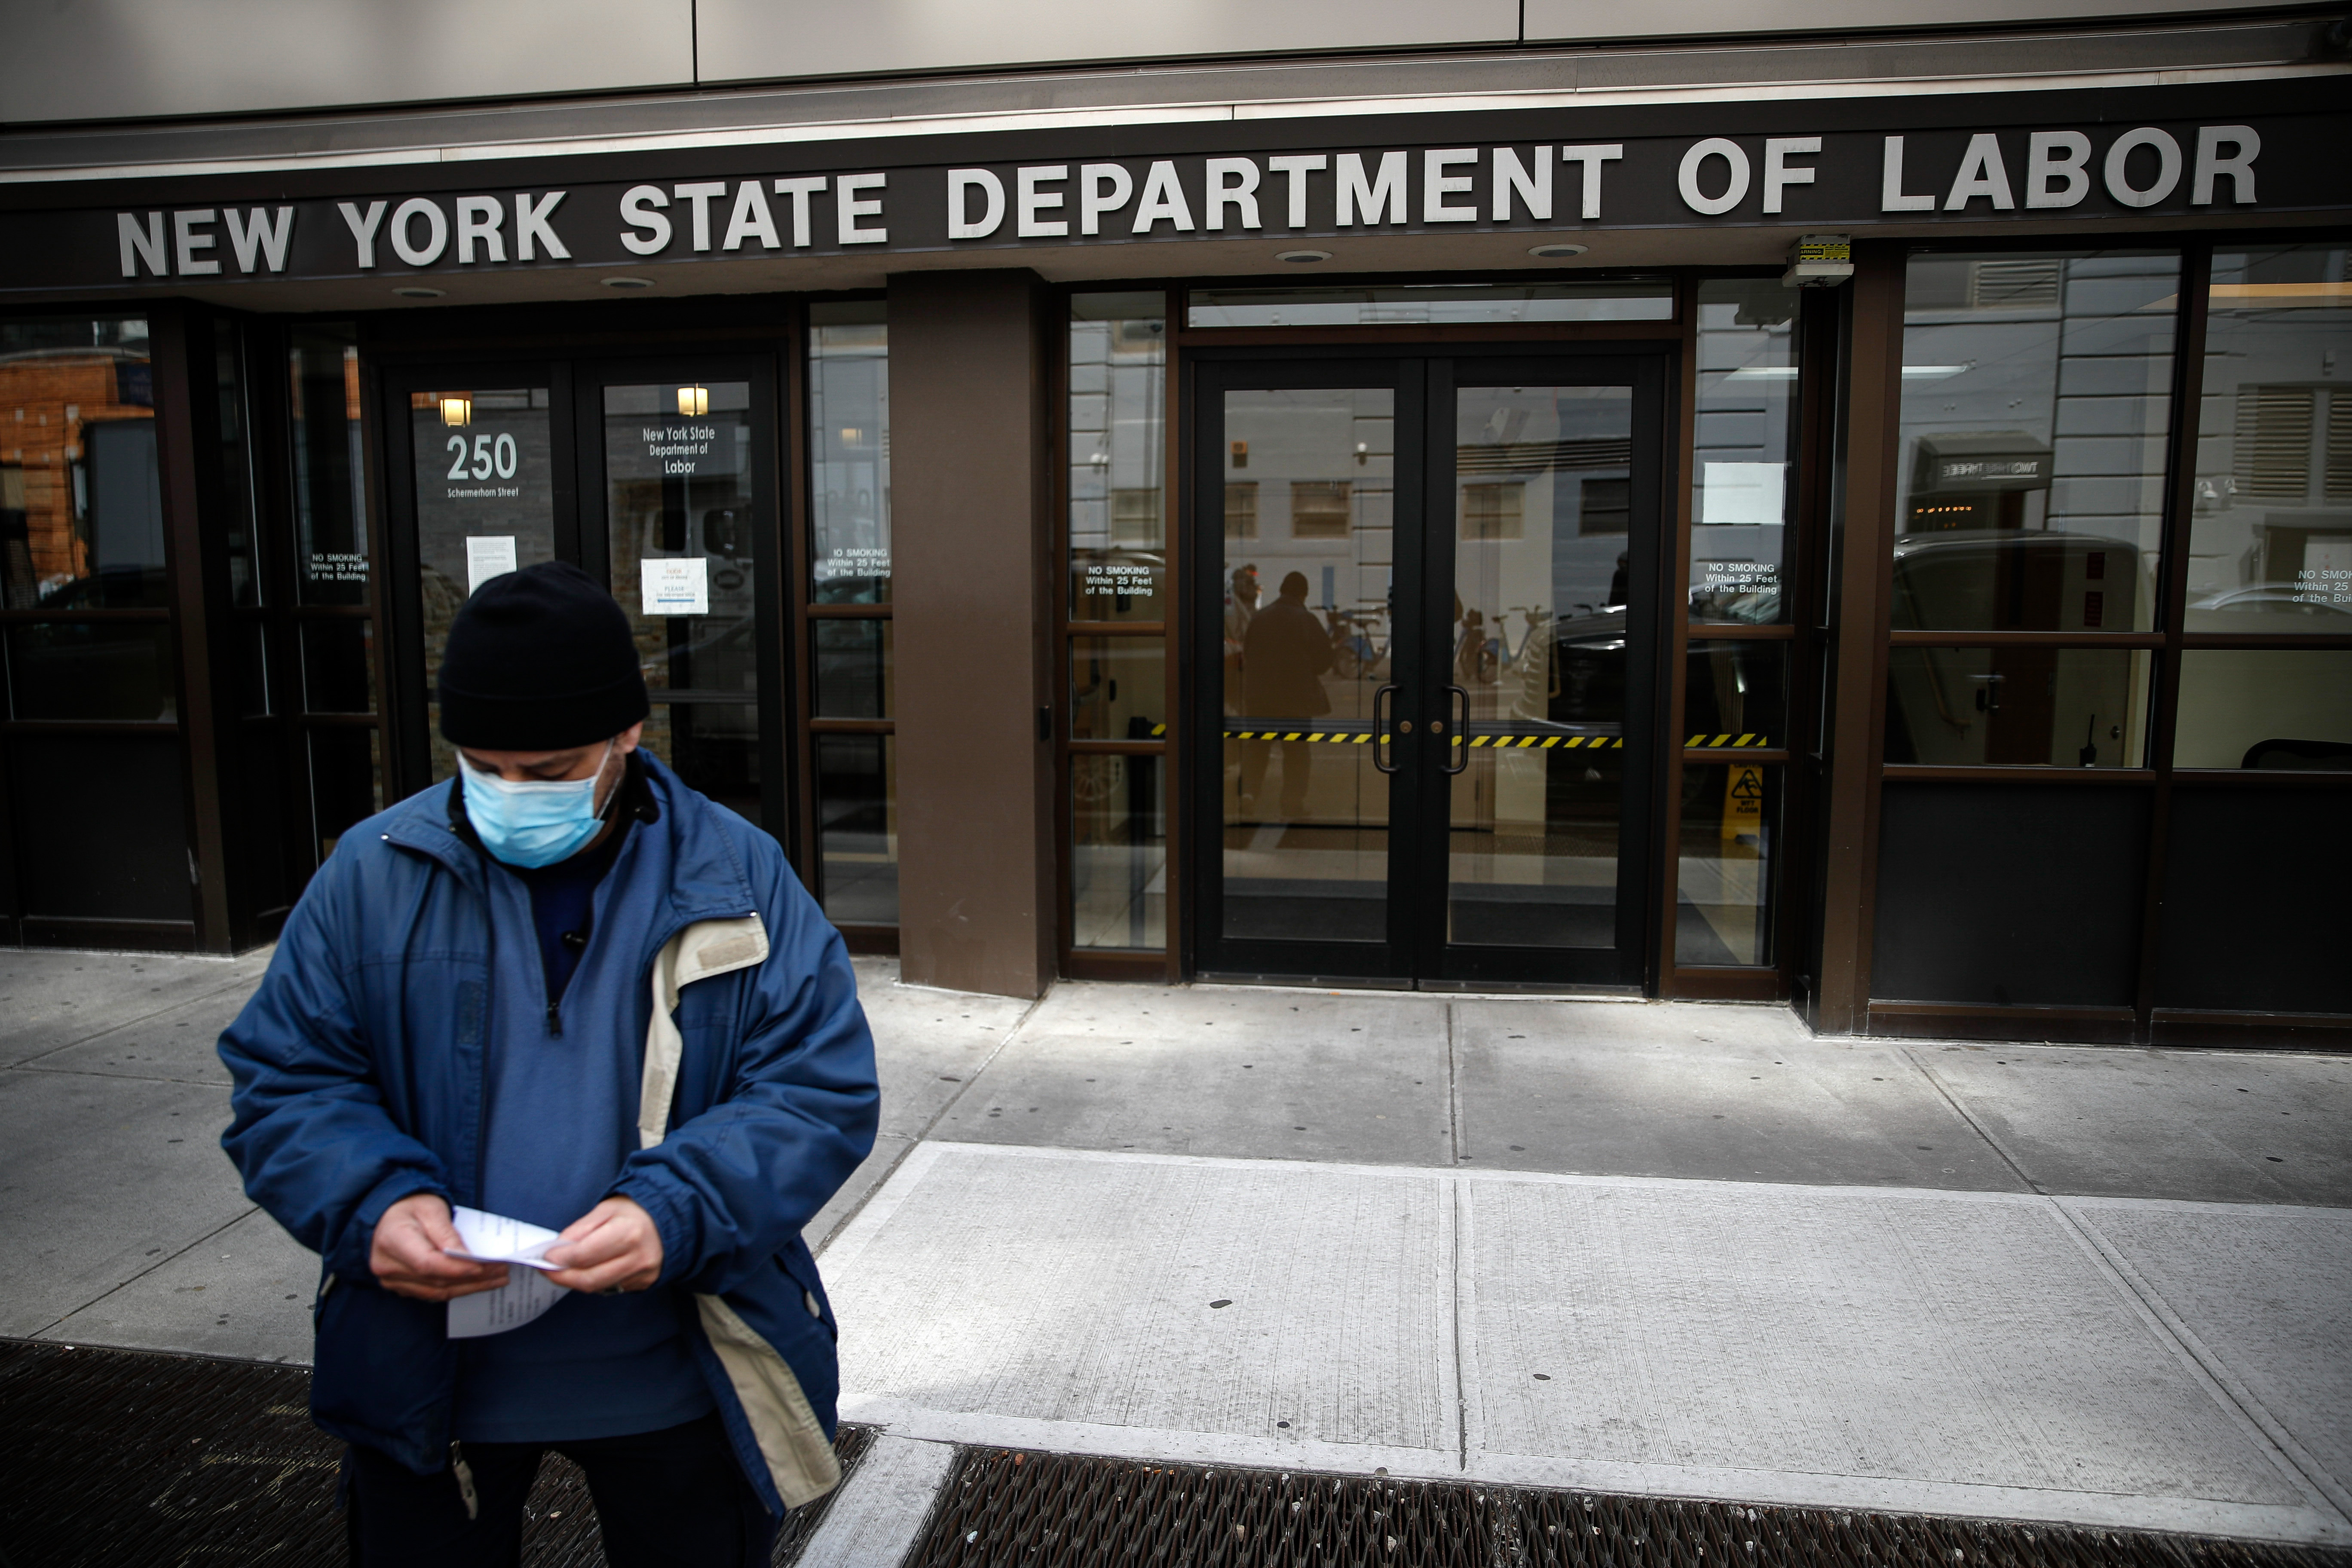 Visitors to the New York State Department of Labor